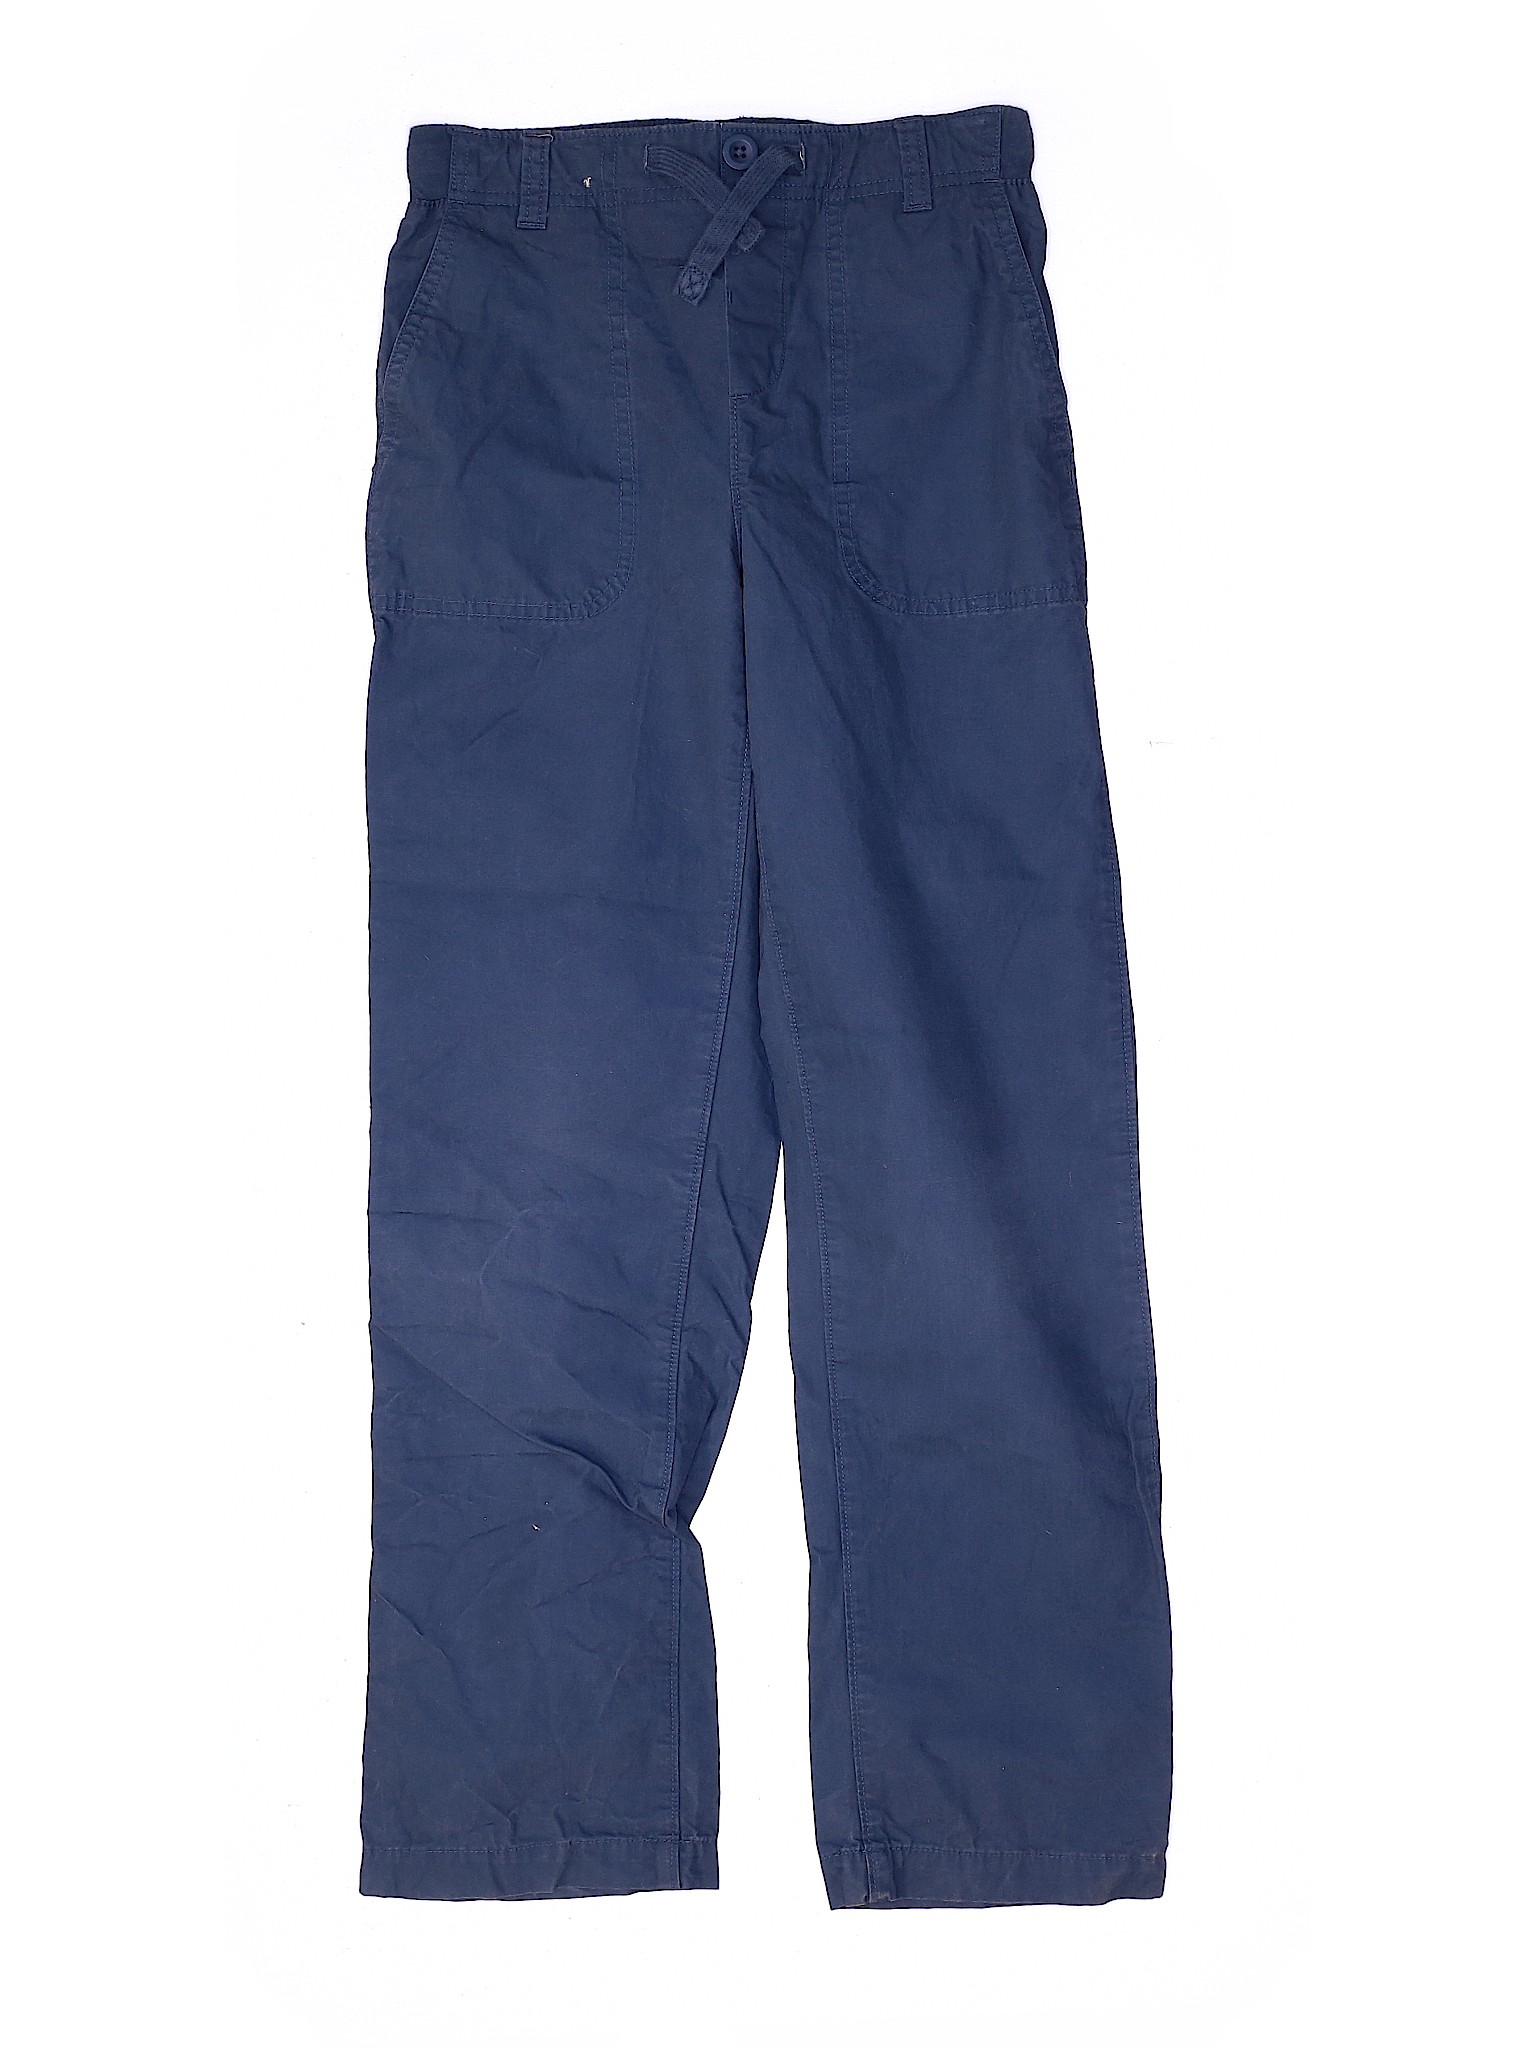 Lands' End 100% Baumwolle Solid Blue Casual Pants Size 10 - 75% off ...